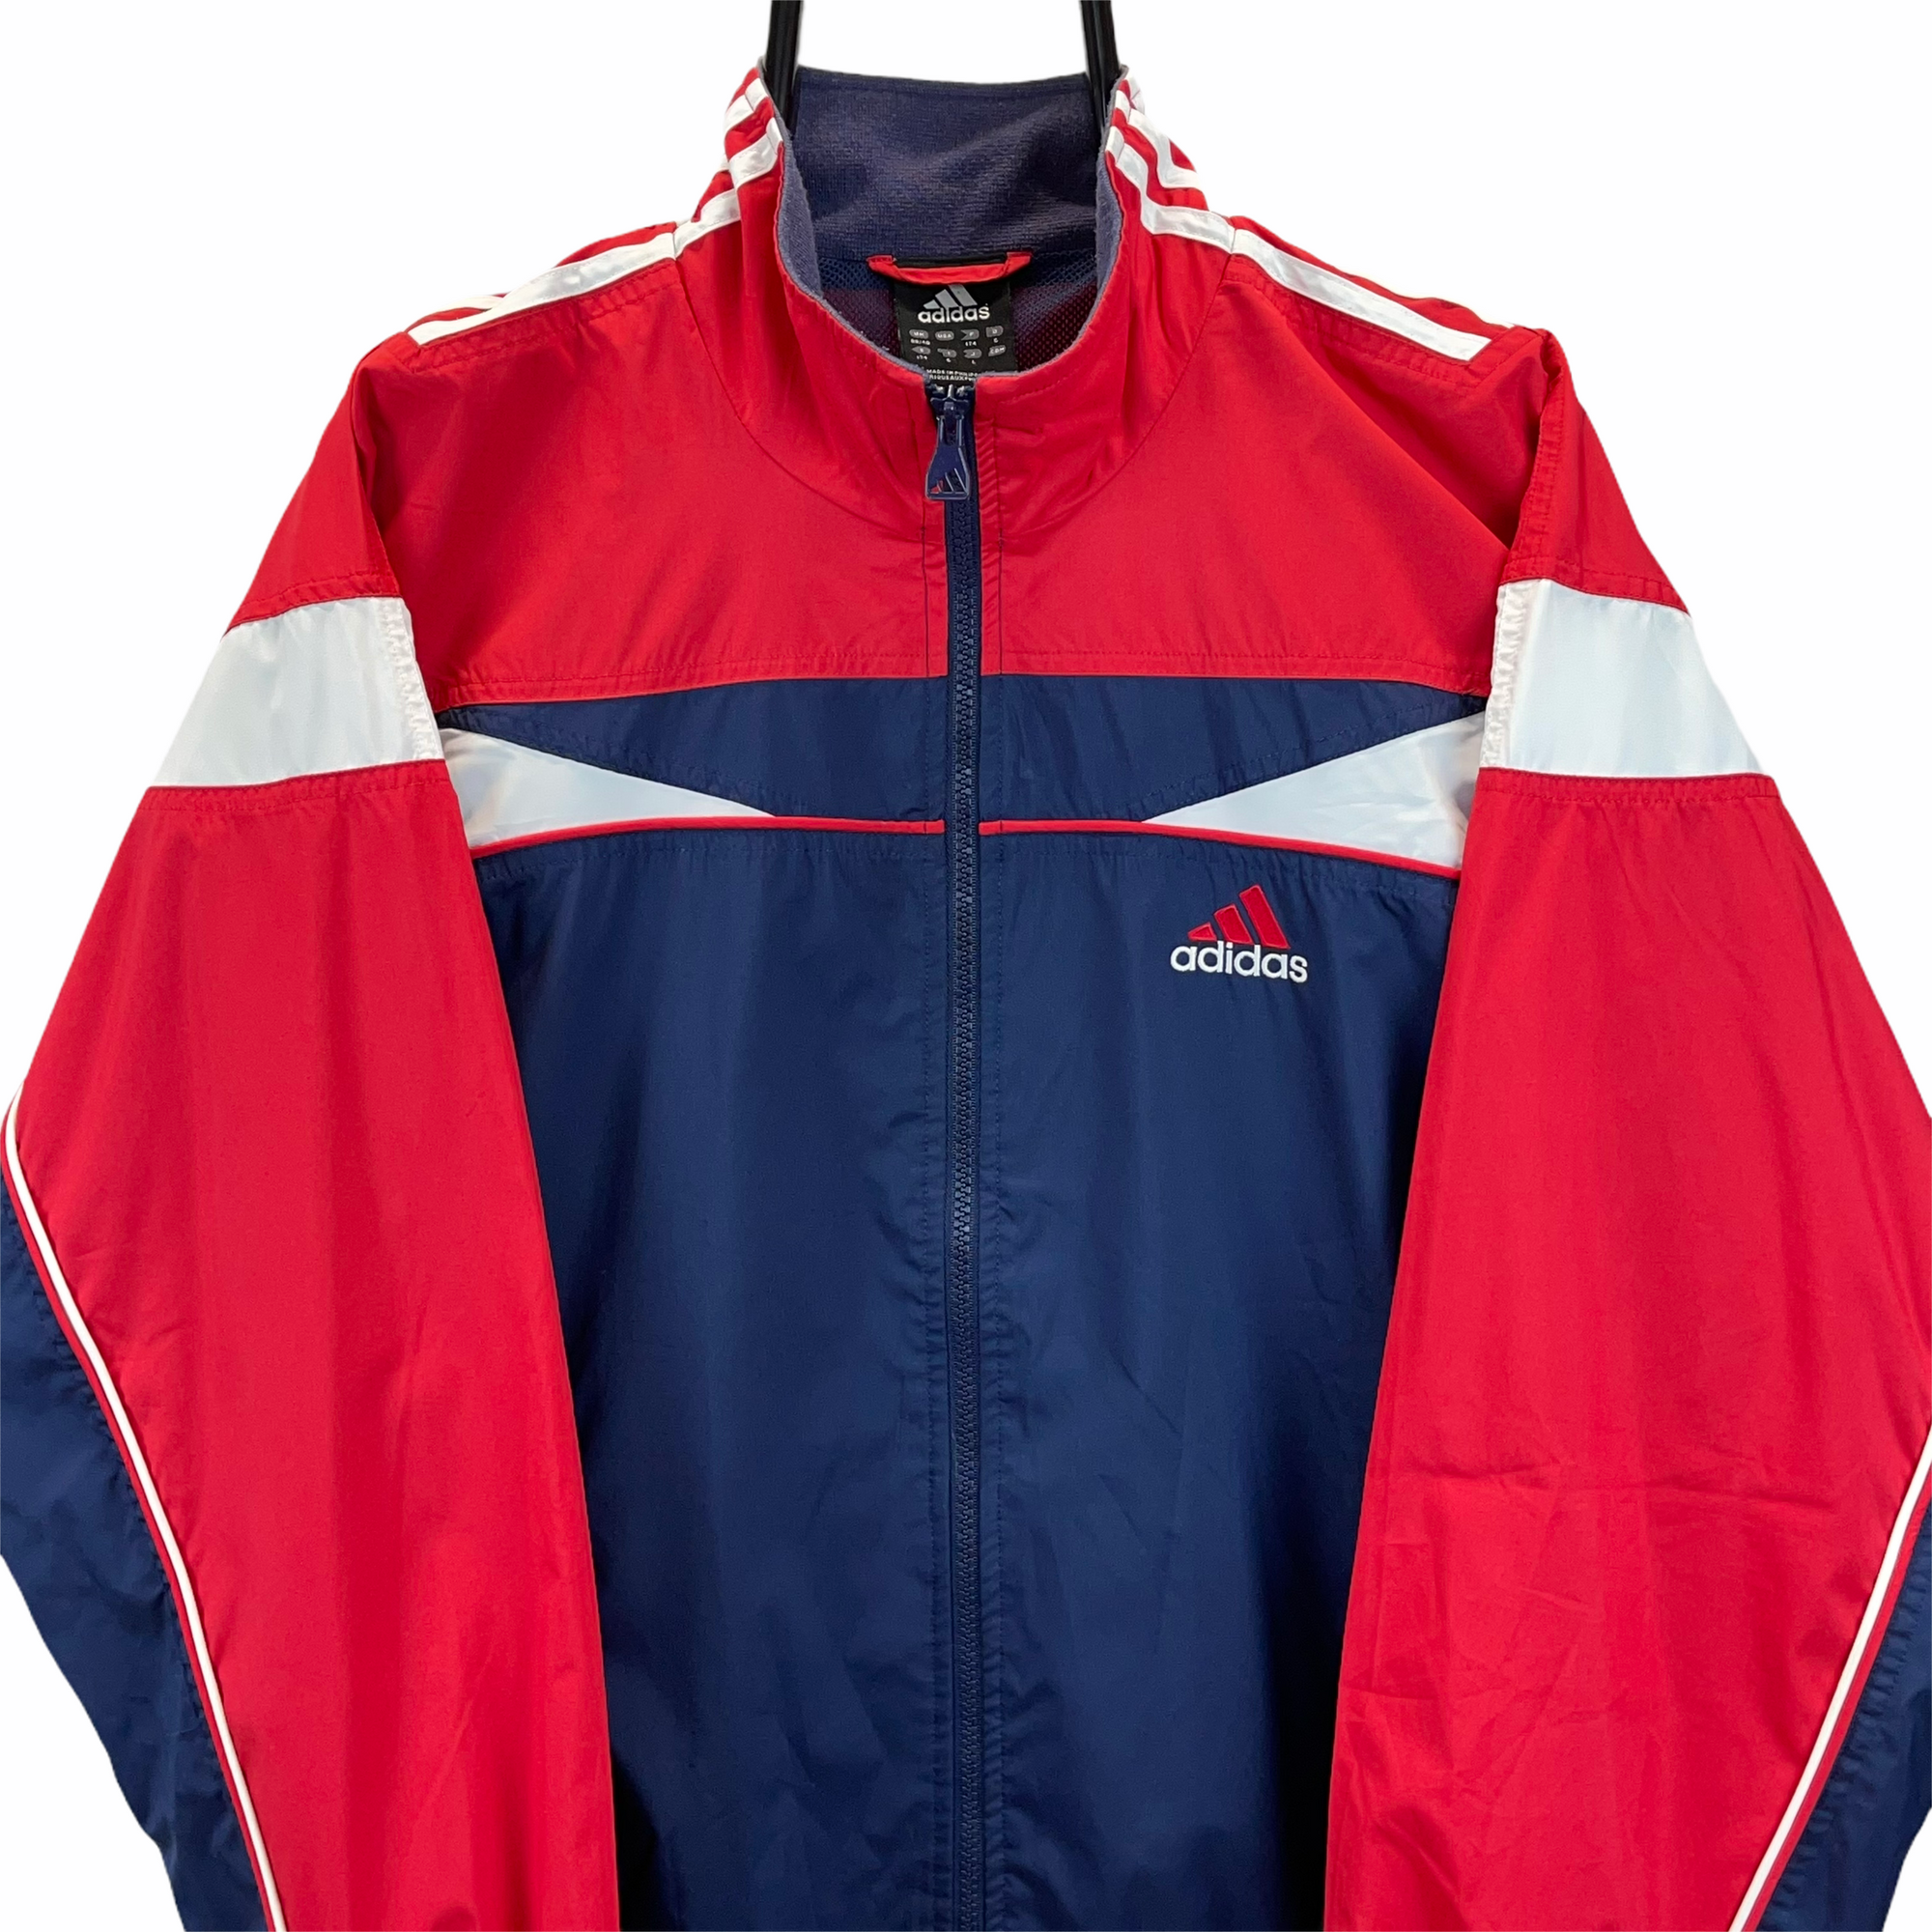 Vintage Adidas Track Jacket in Red, Navy & White - Men's Large/Women's XL